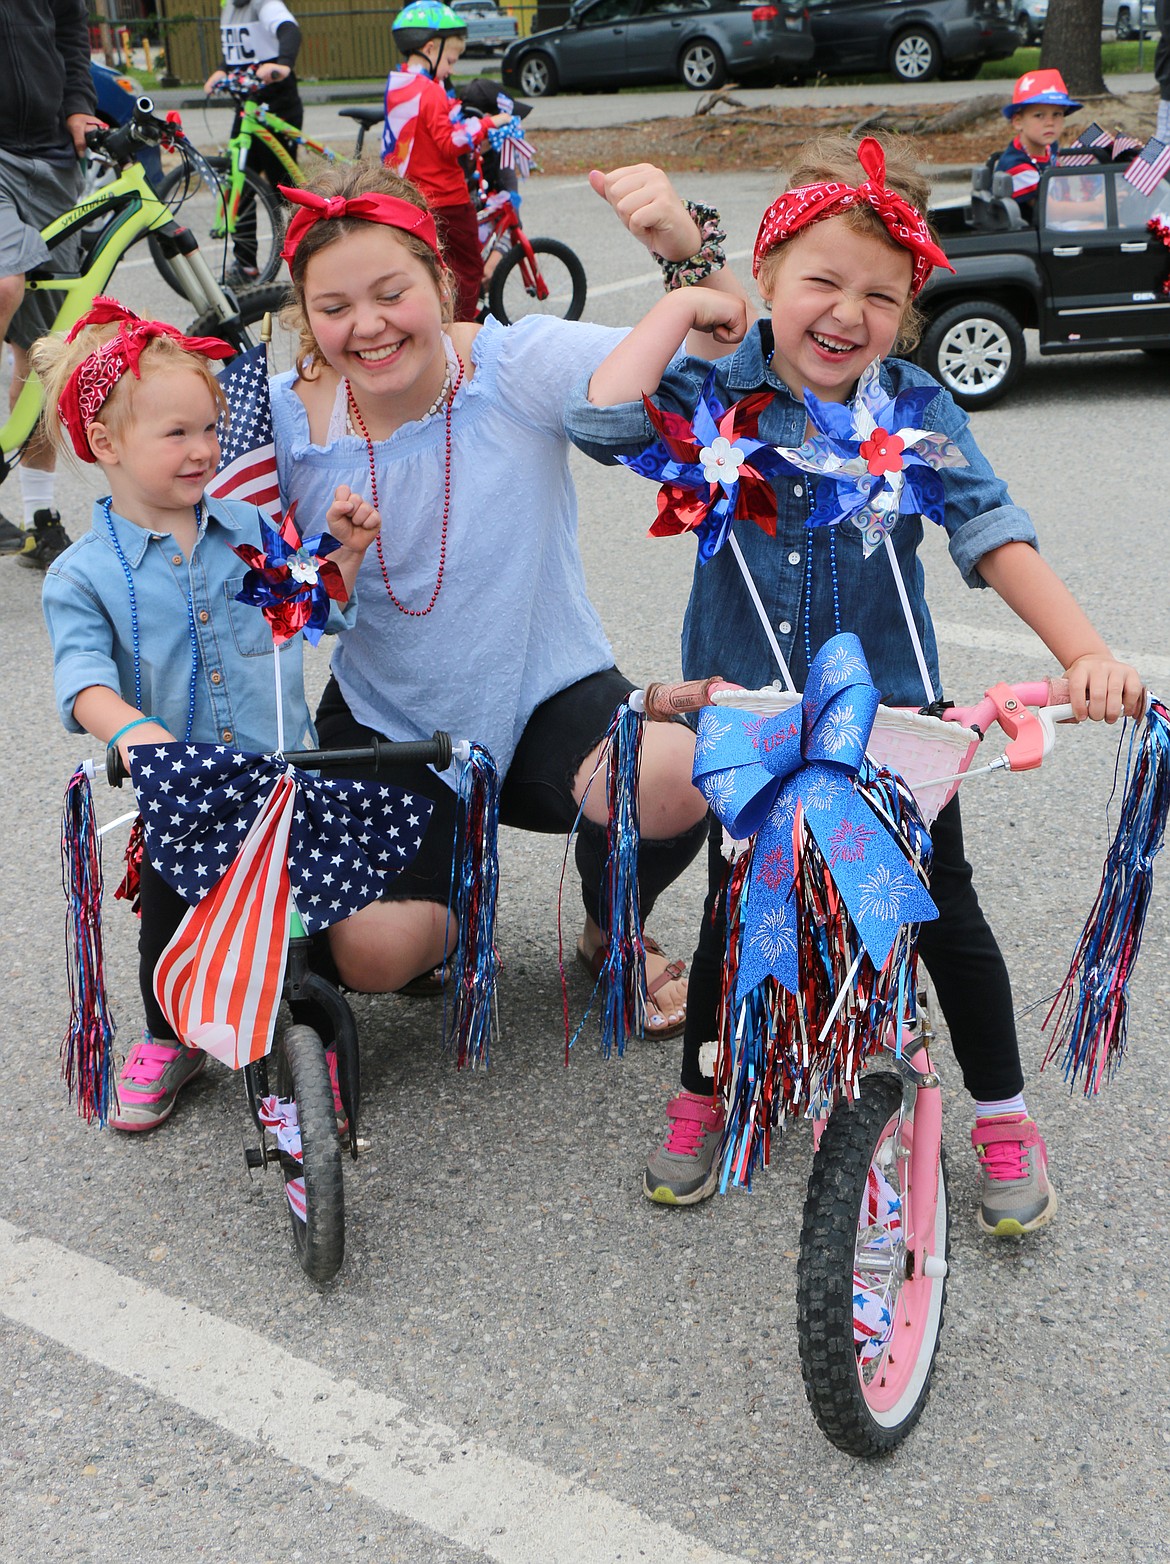 (Daily Bee file photo/CAROLINE LOBSINGER)
Bailey Kleffner, Katie Stewart and Ashley Kleffner demonstrate their Rosie the Riveter style as they wait for the start of the Sandpoint Lions’ Fourth of July Kids Parade last year.